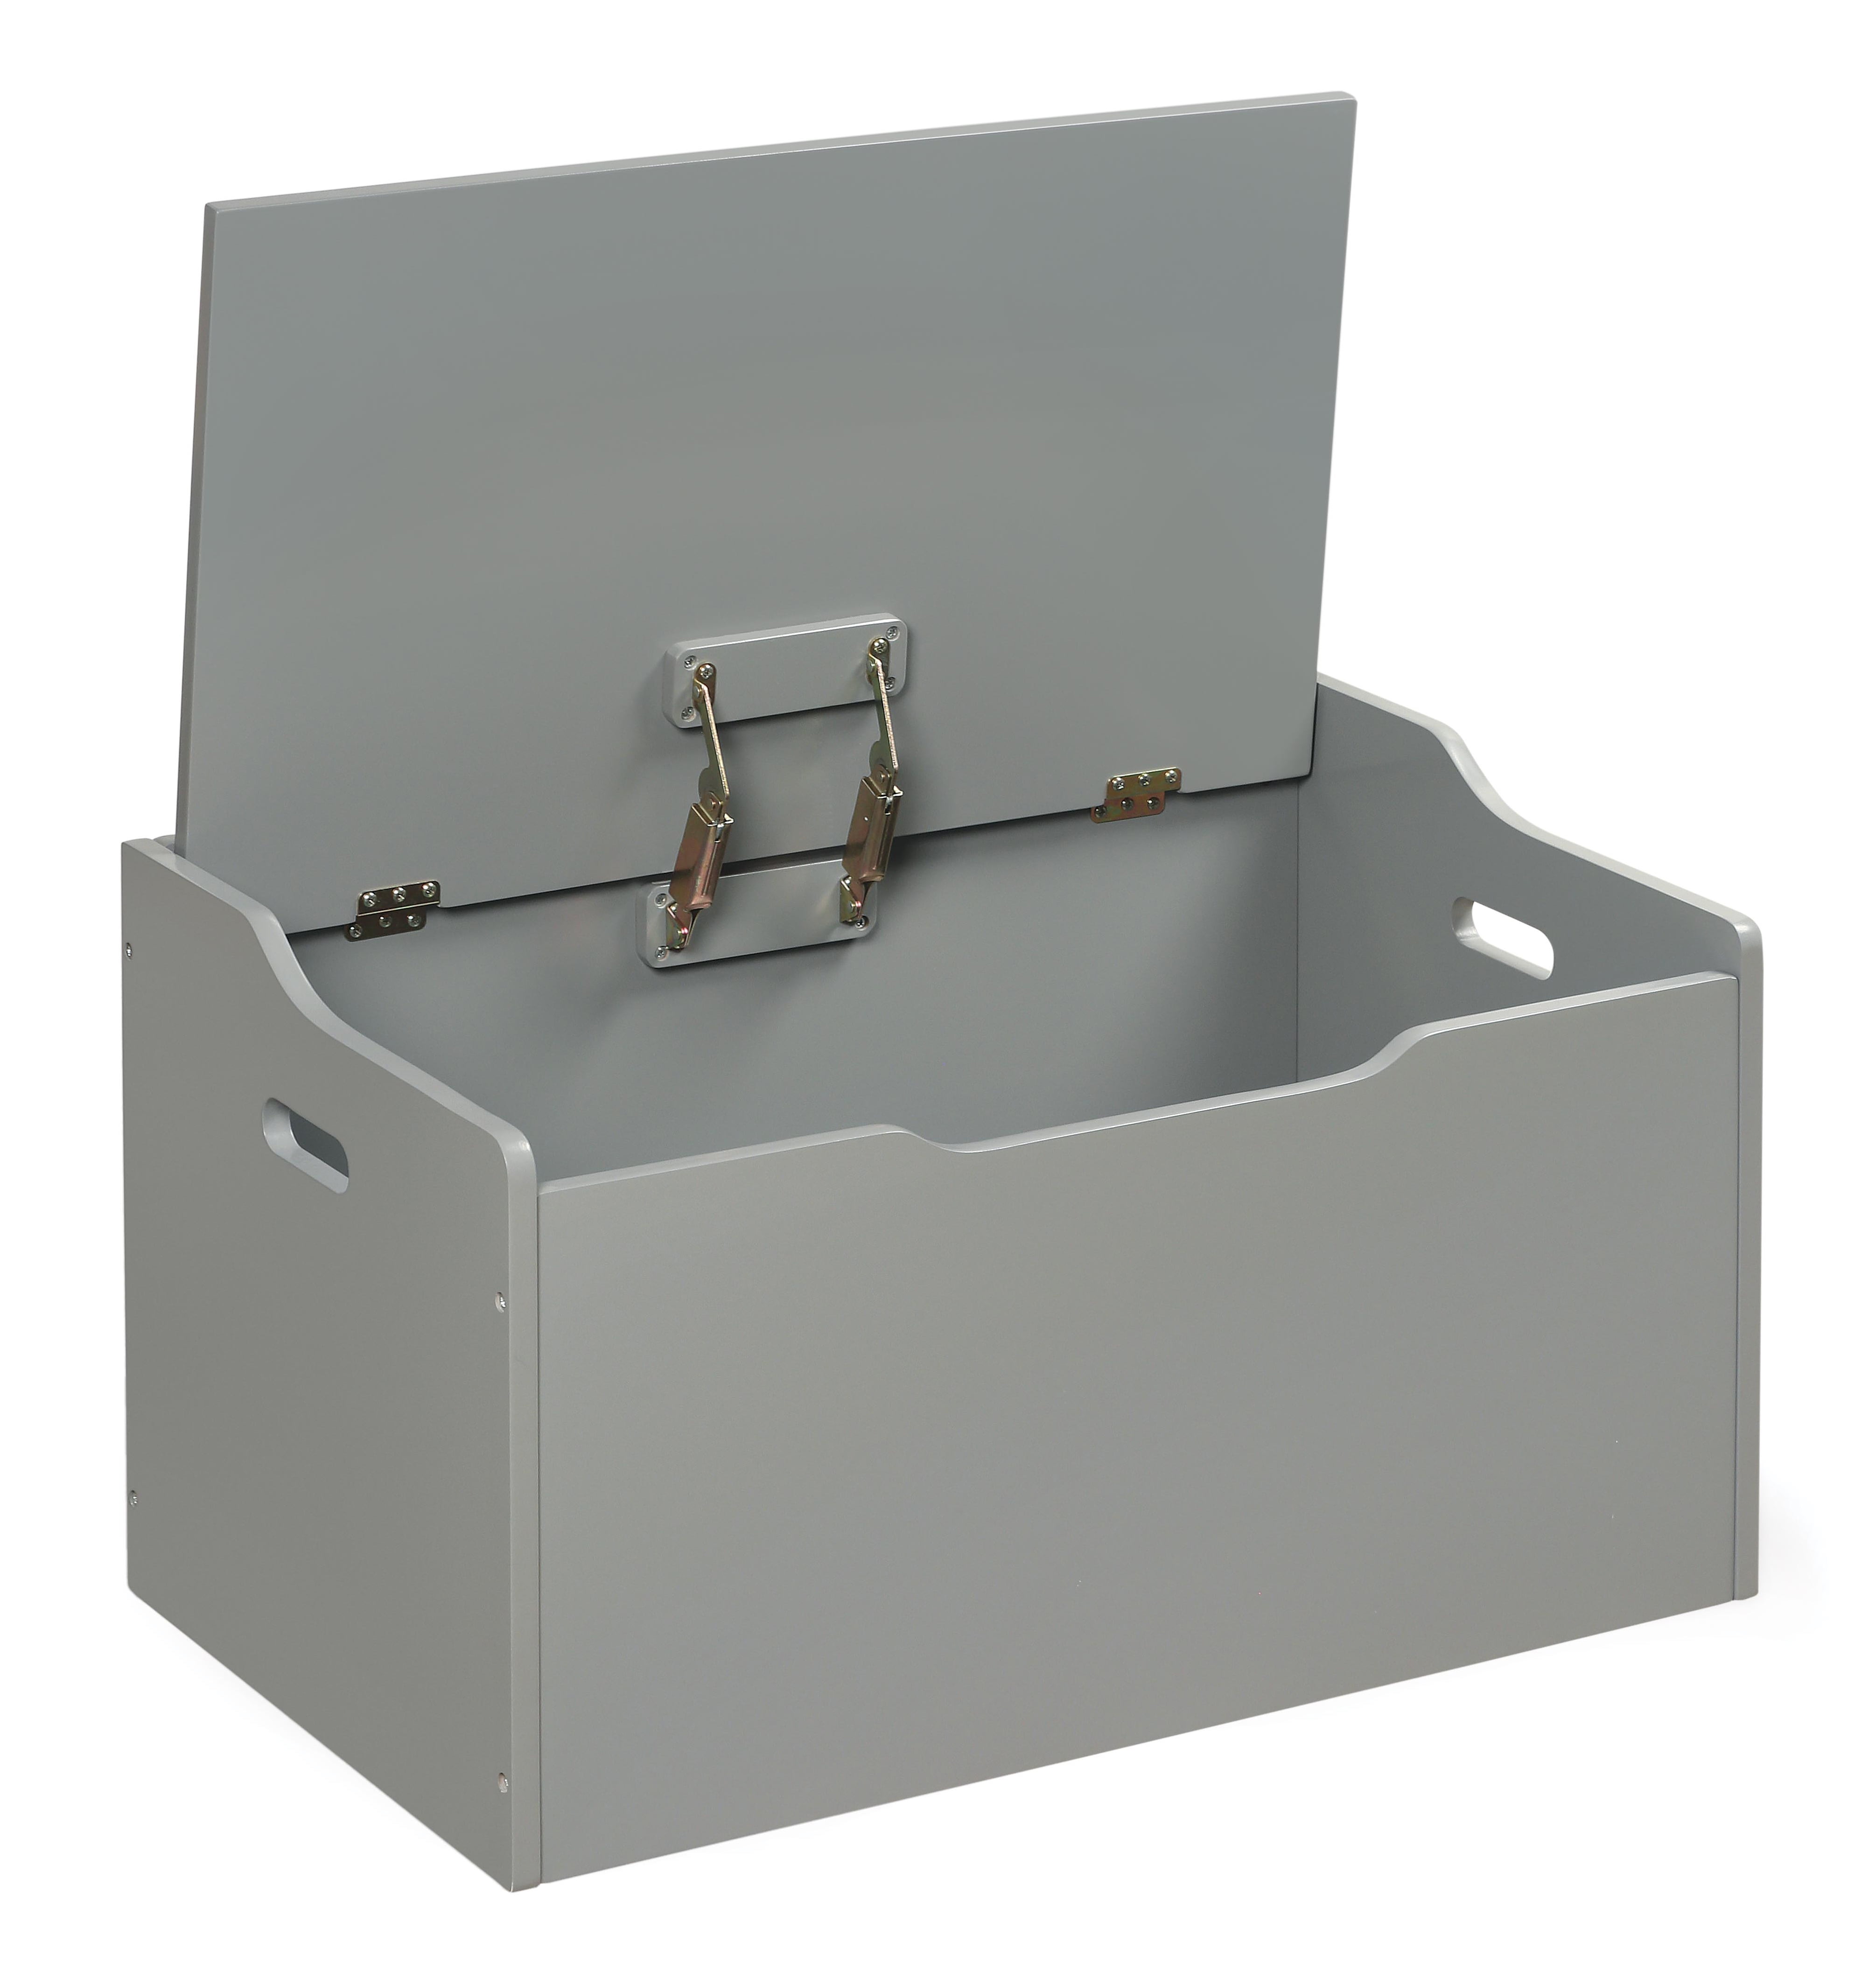 hydraulic hinges for toy chest